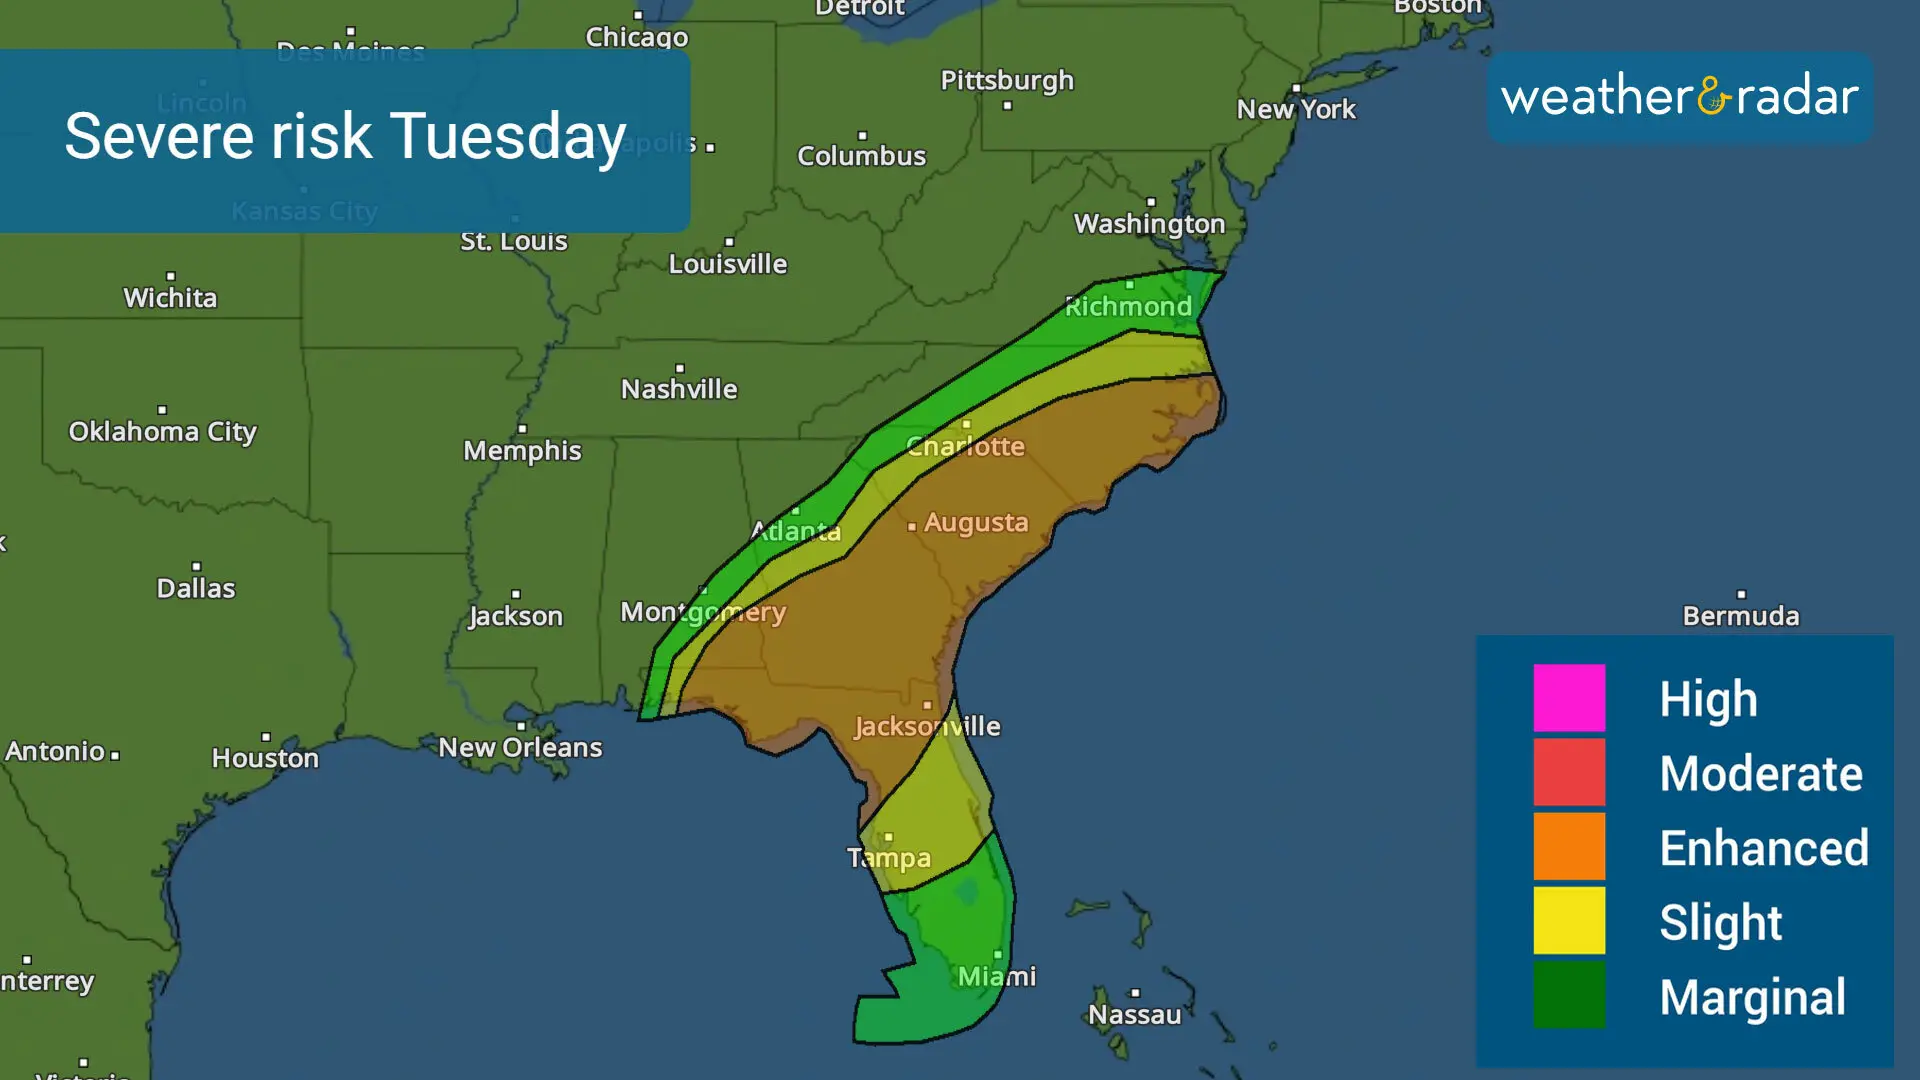 Severe risk for Tuesday.